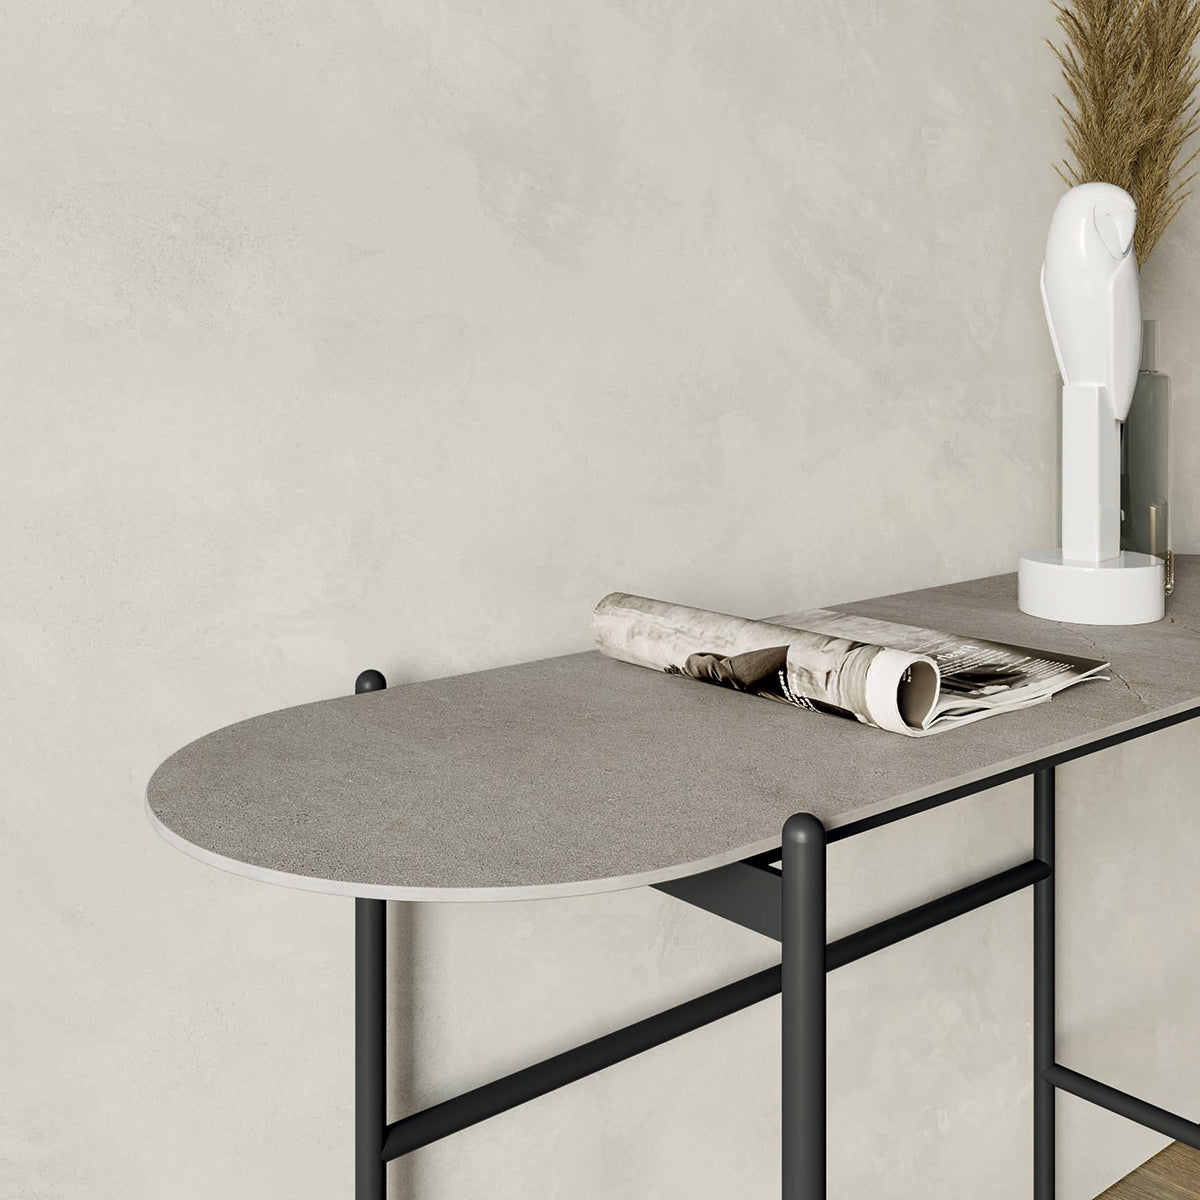 Supernova Console Side Table by Dall'Agnese